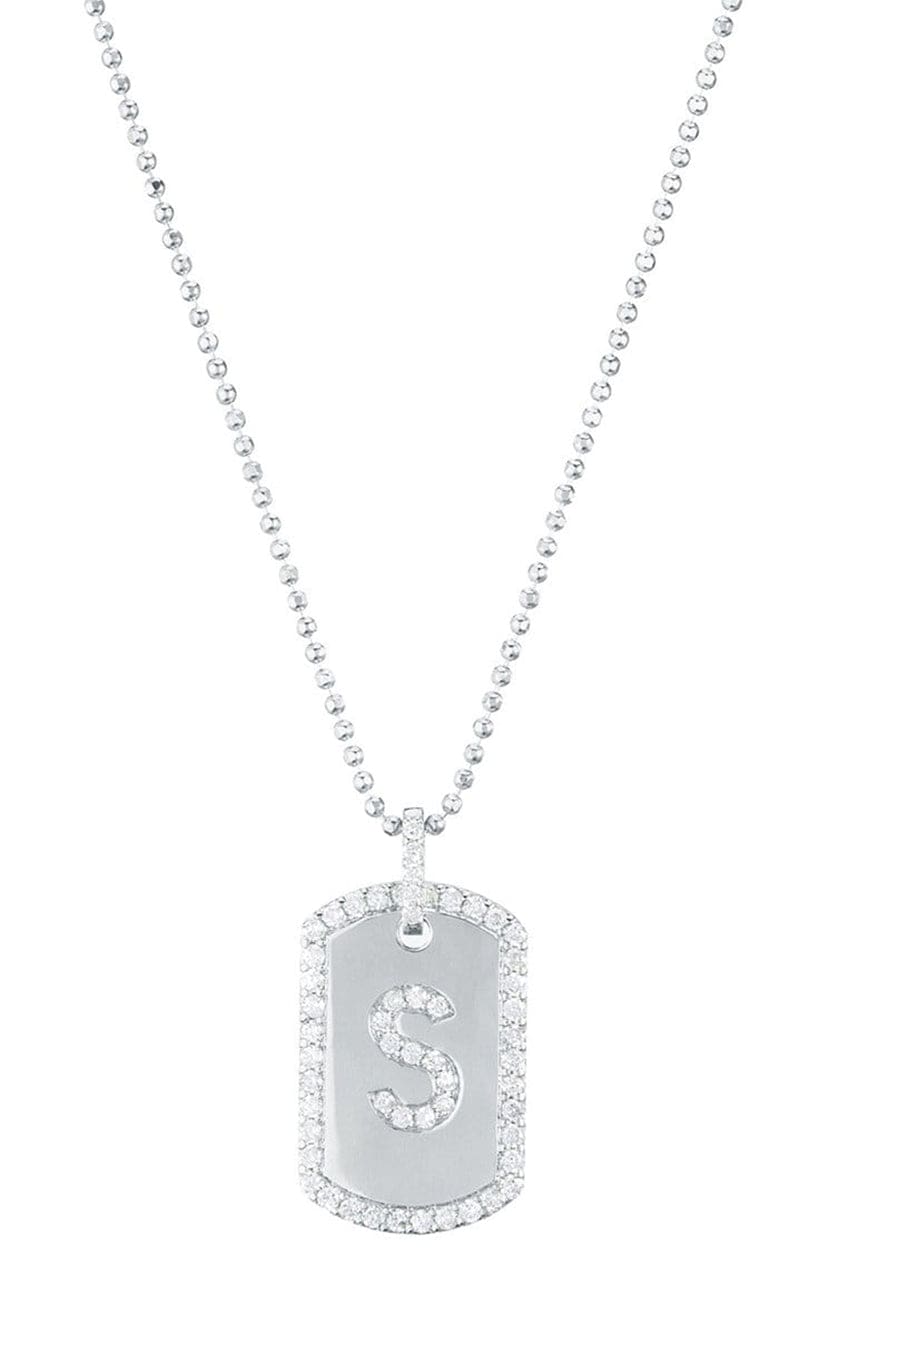 CARBON & HYDE-Initial Dogtag Necklace - White Gold-WHITE GOLD